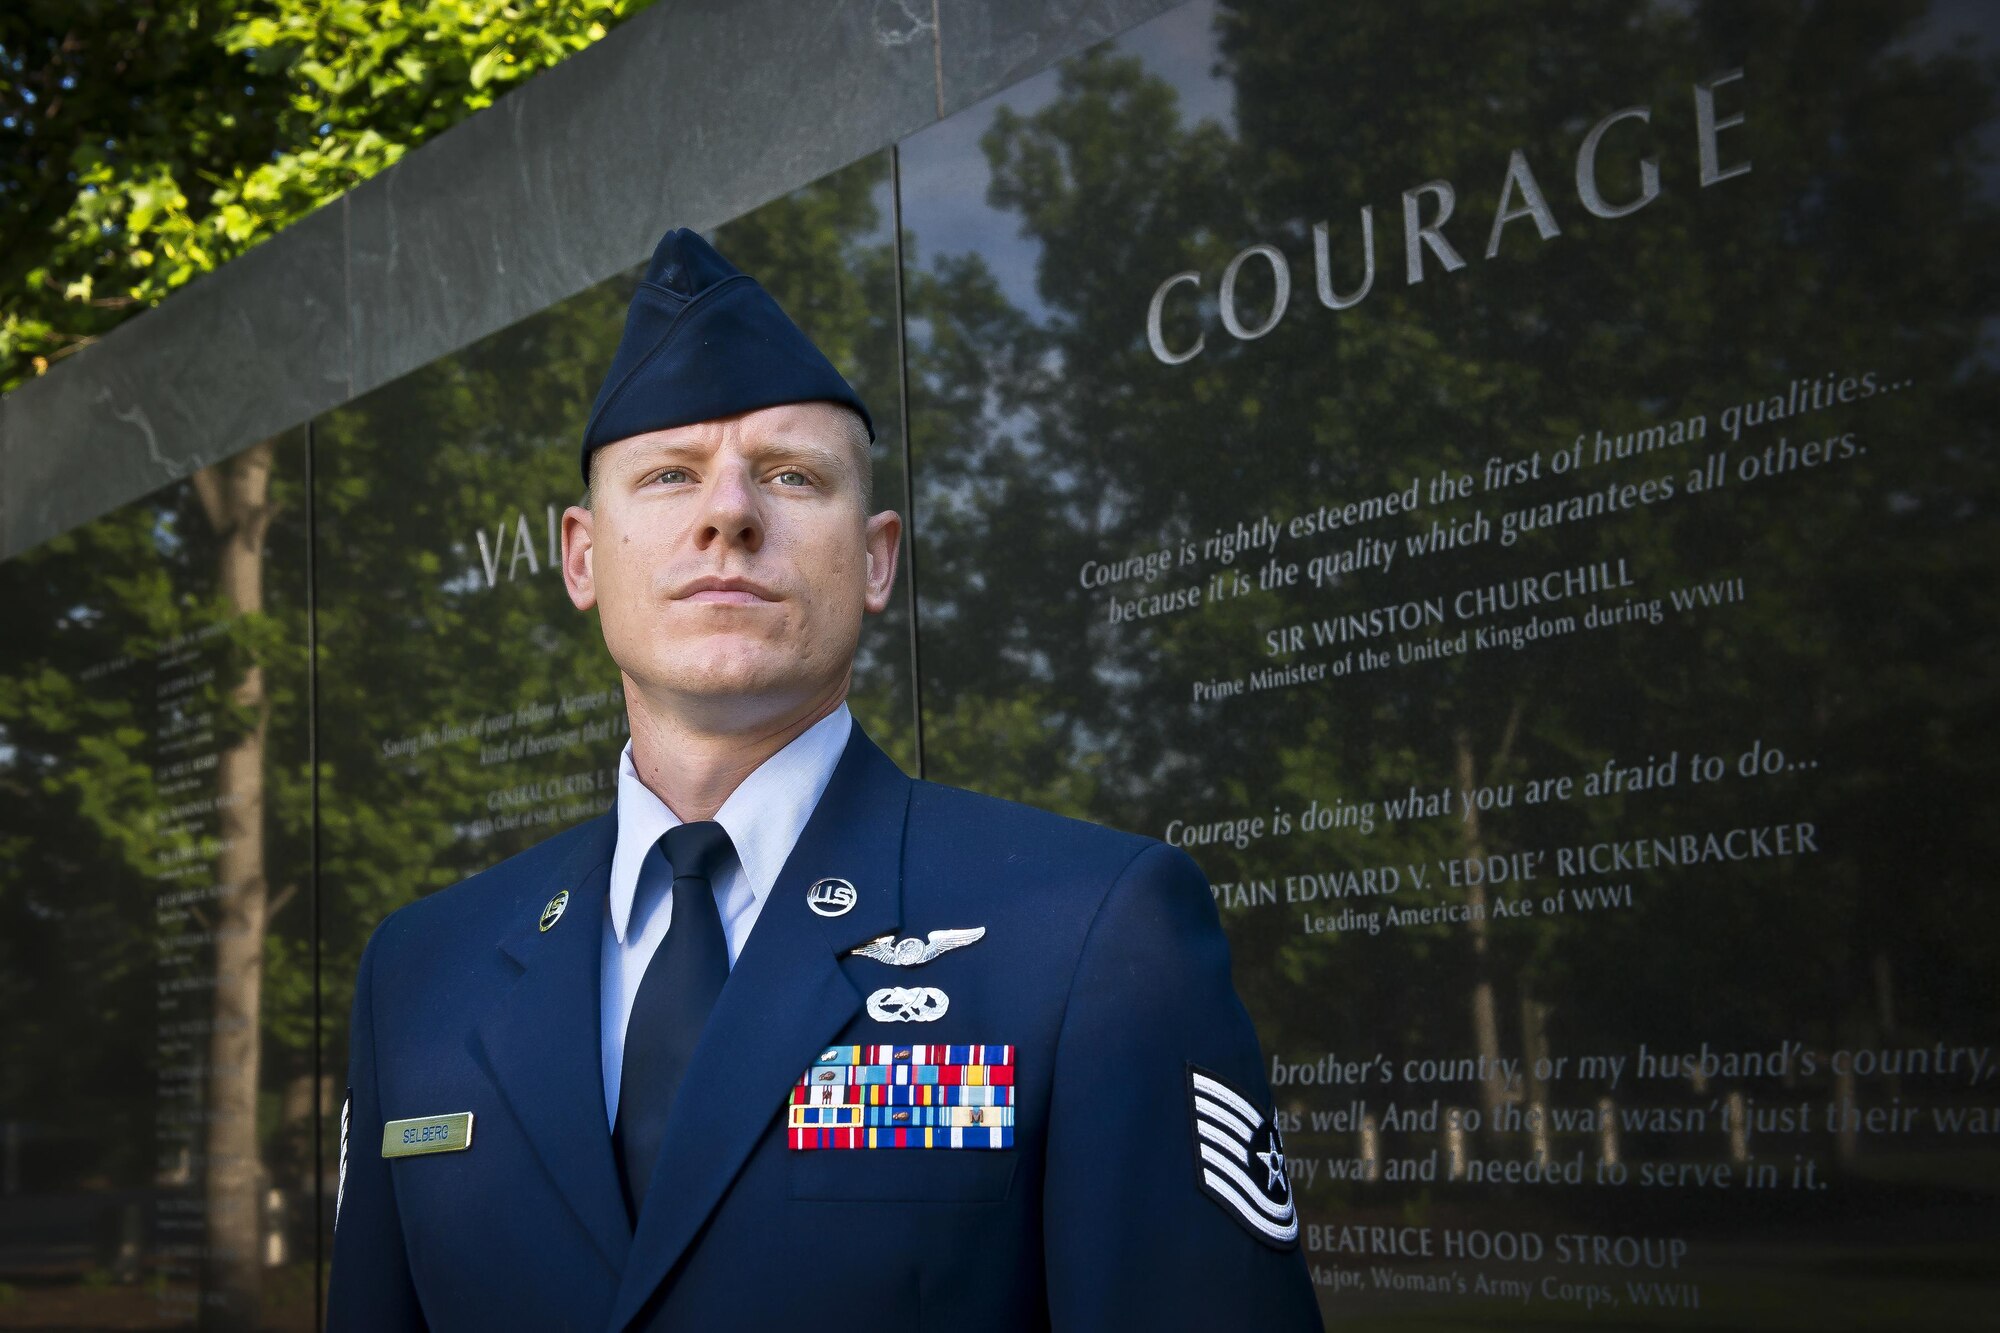 Tech. Sgt. Jason D. Selberg, the Air National Guard's 2016 Outstanding NCO of the Year, poses for a photo at the Air Force Memorial in Washington D.C. May 31, 2017. Selberg is assigned to the 214th Reconnaissance Squadron, Arizona ANG, and was also named one of the U.S. Air Force's 12 Outstanding Airmen of the Year, out of the 105,700 Airmen in the Air National Guard.